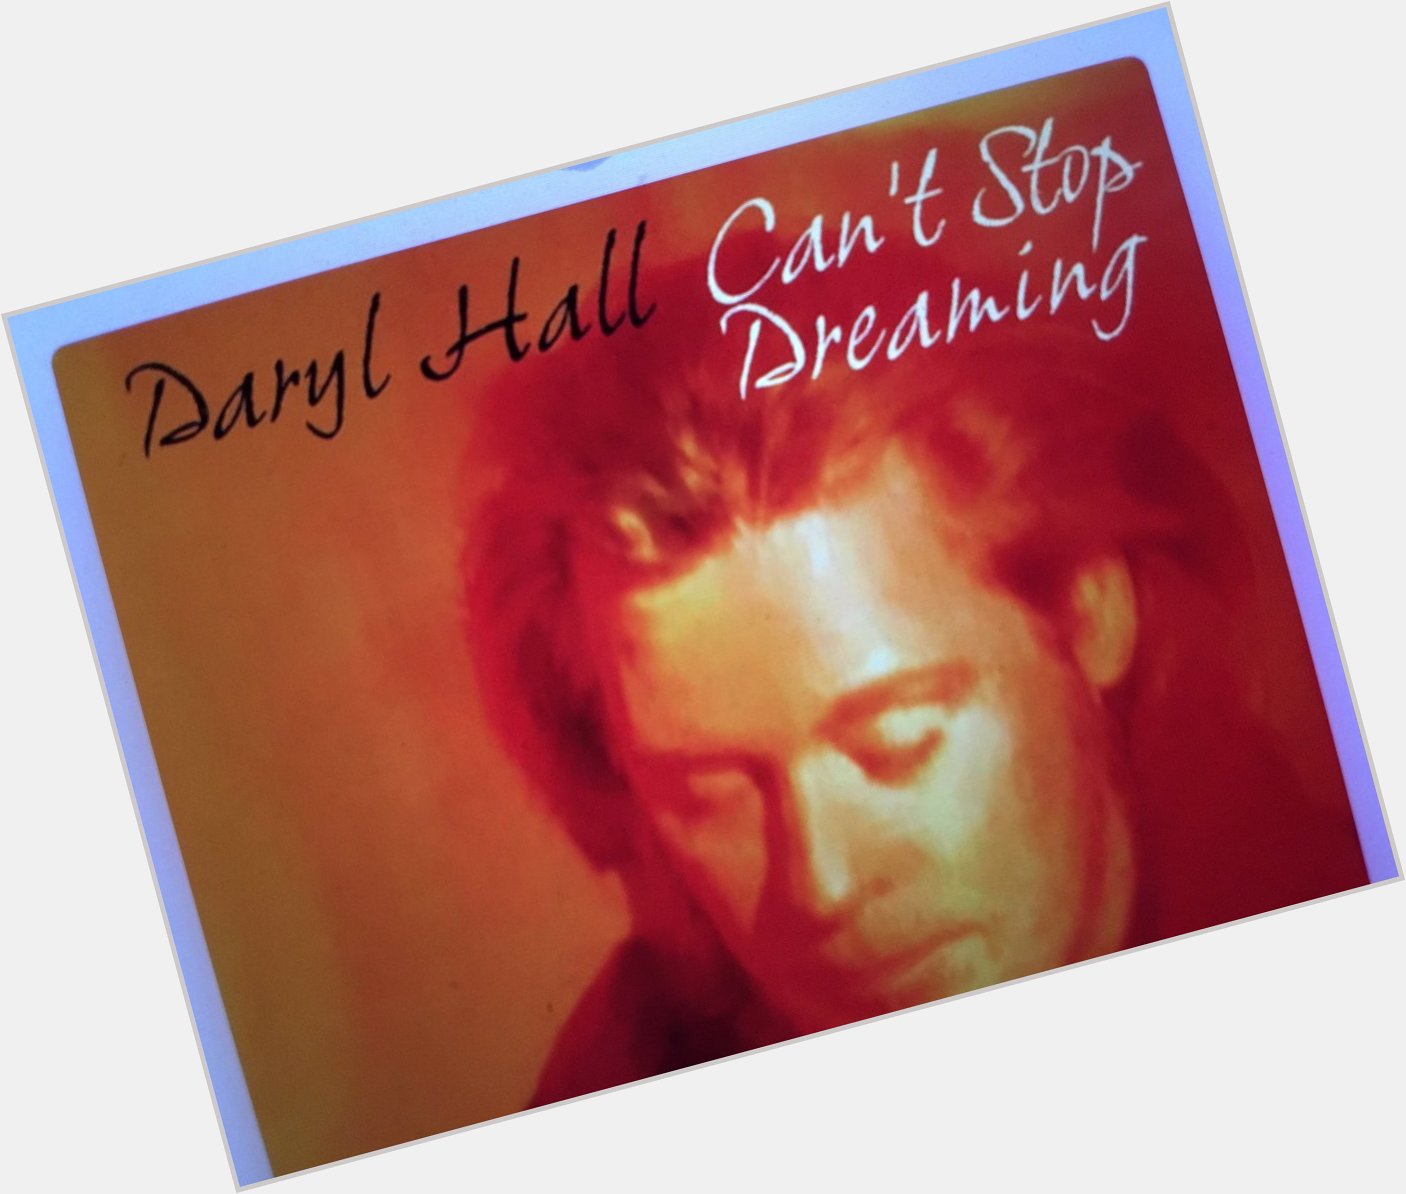   Happy Birthday Daryl Hall. This is a great album. Justify is my favorite song. 